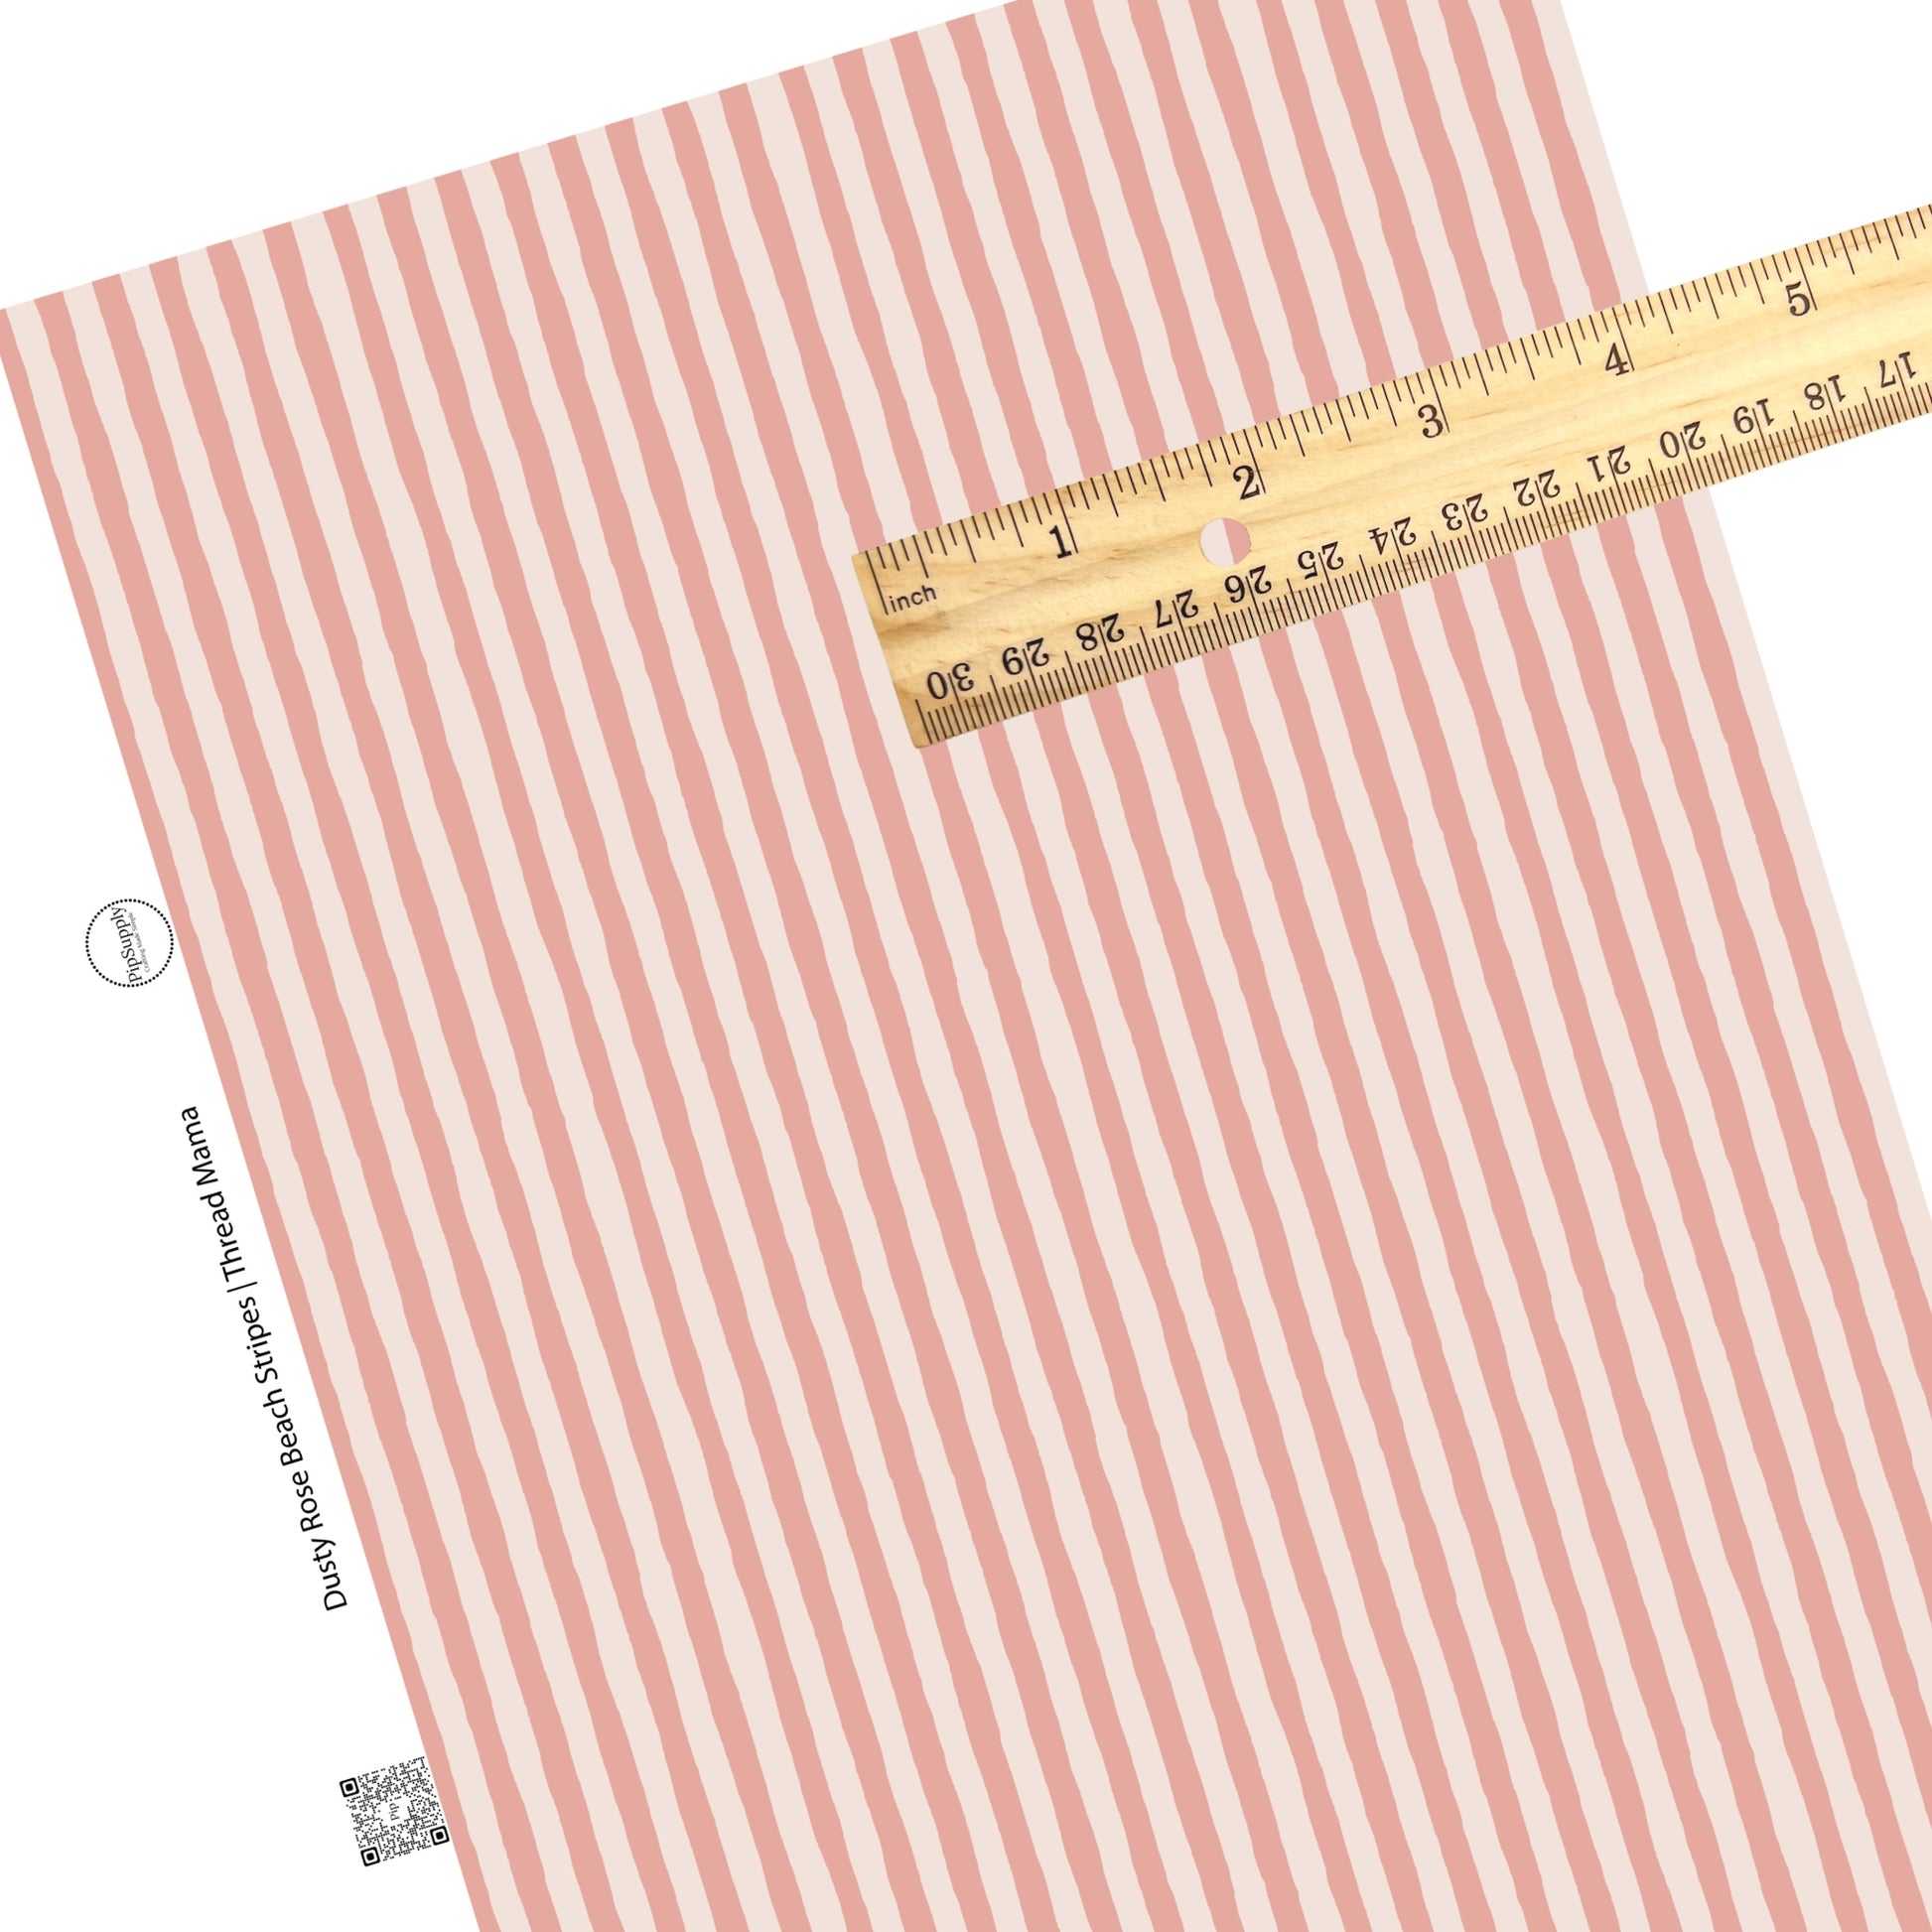 Distressed pink and cream stripe faux leather sheets